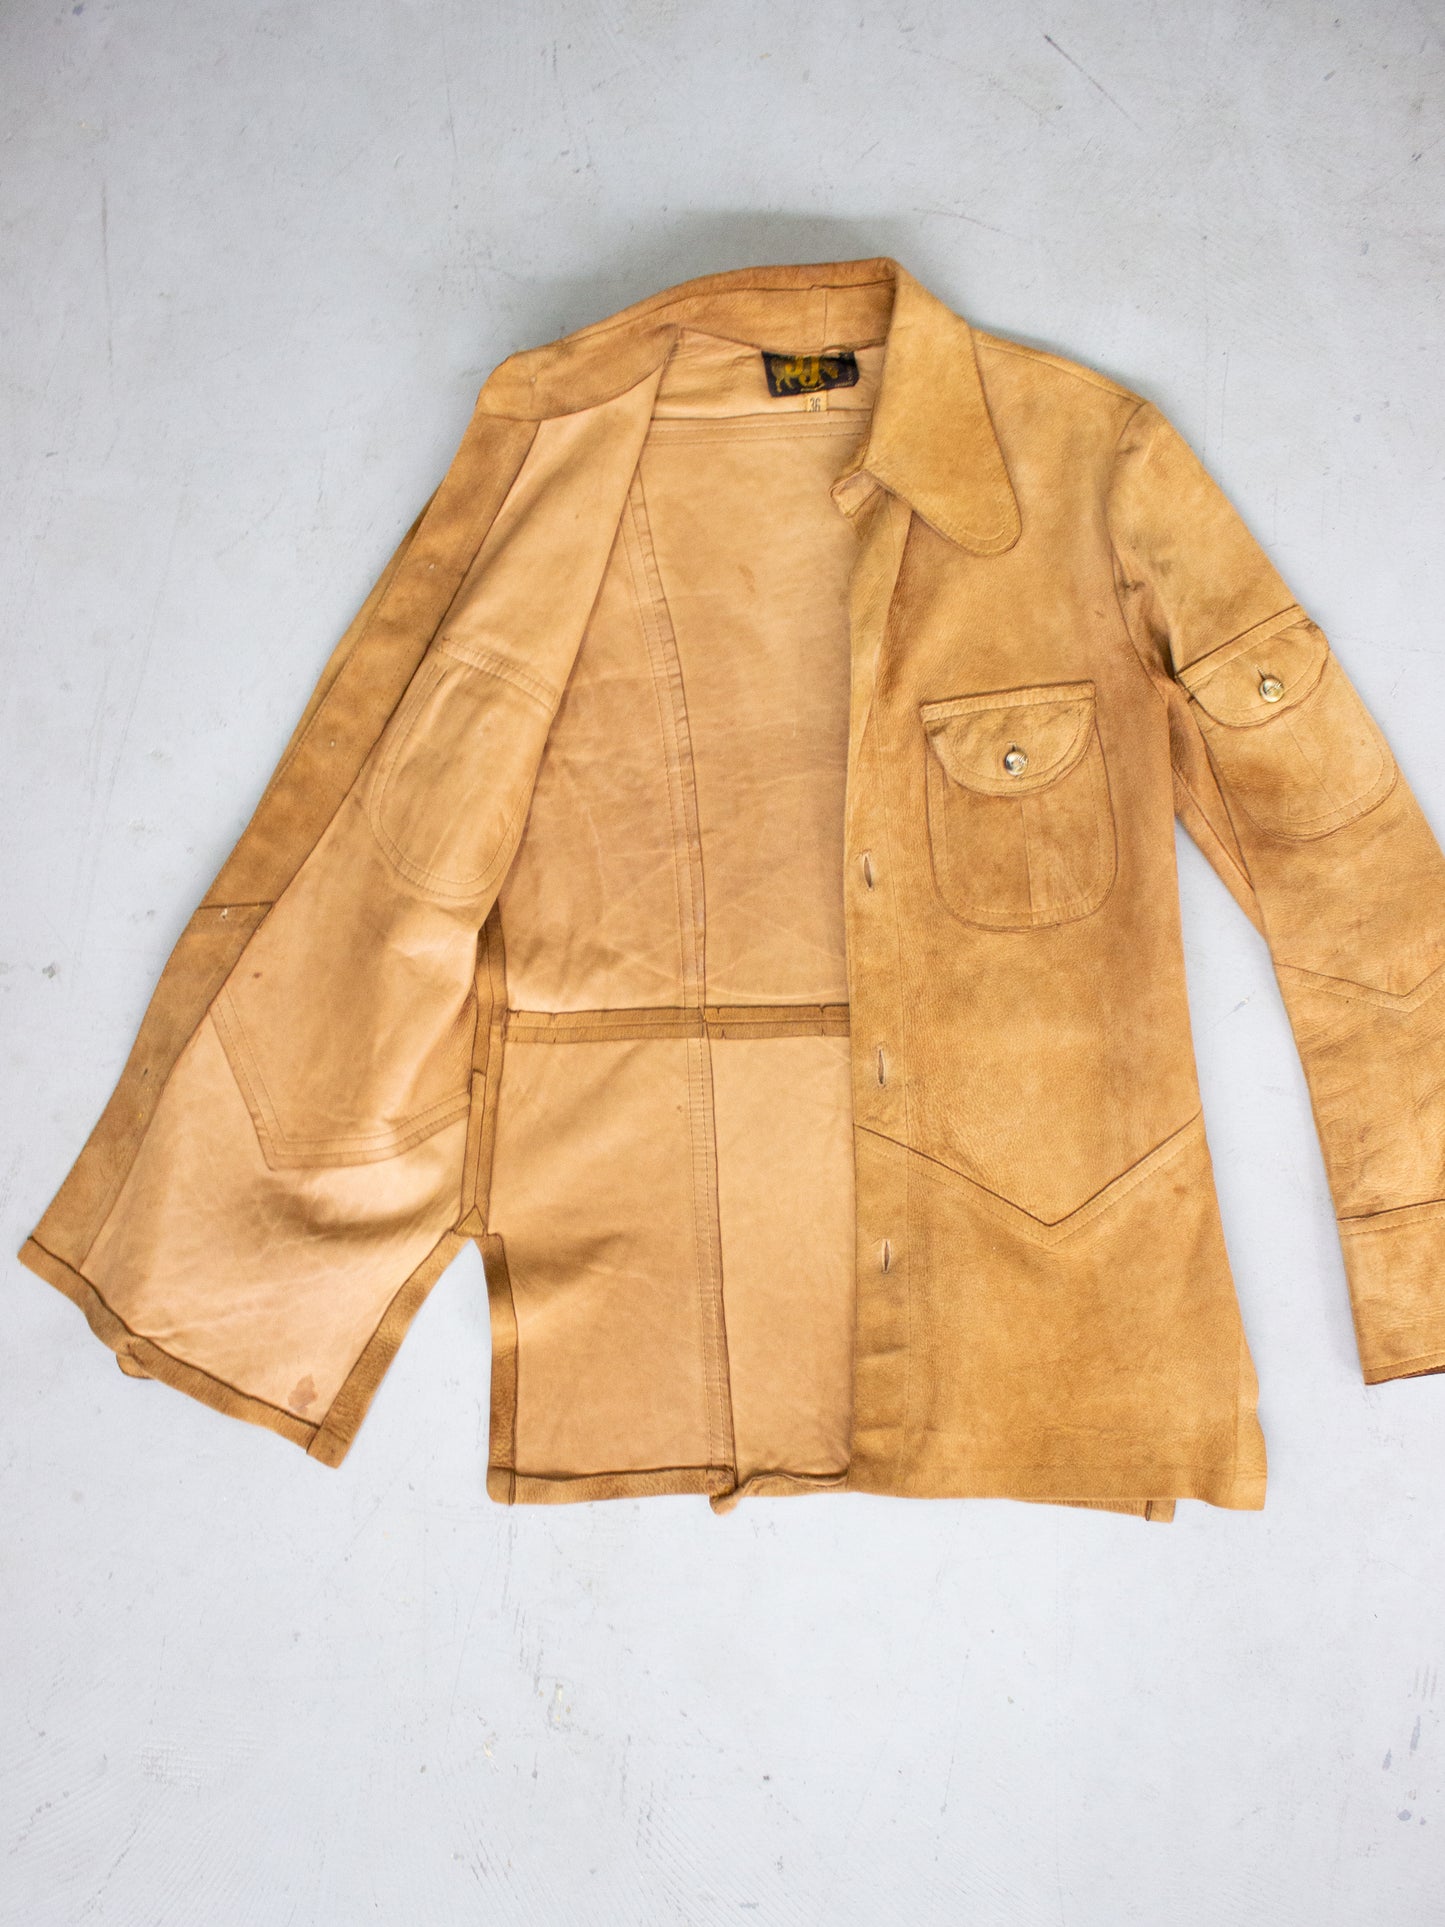 1970's Buckskin Suede Leather Jacket By JJ Made In Canada (Small)